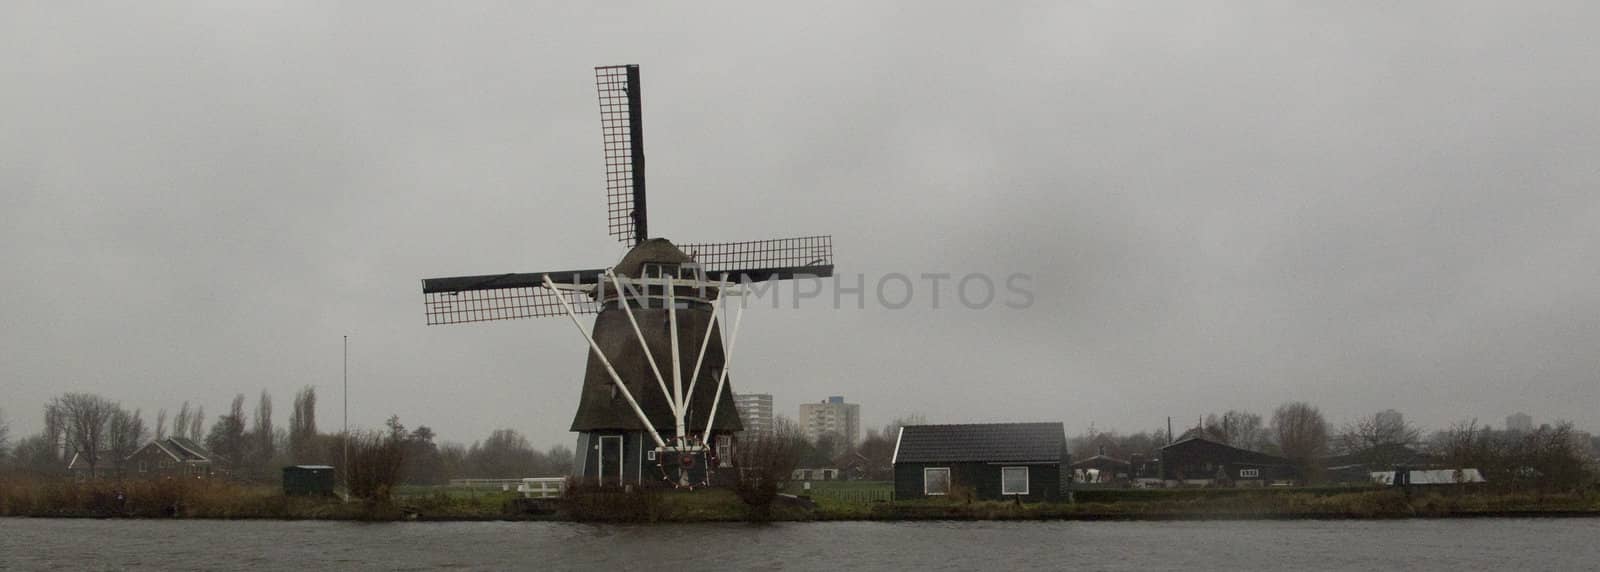 Windmill by medsofoto